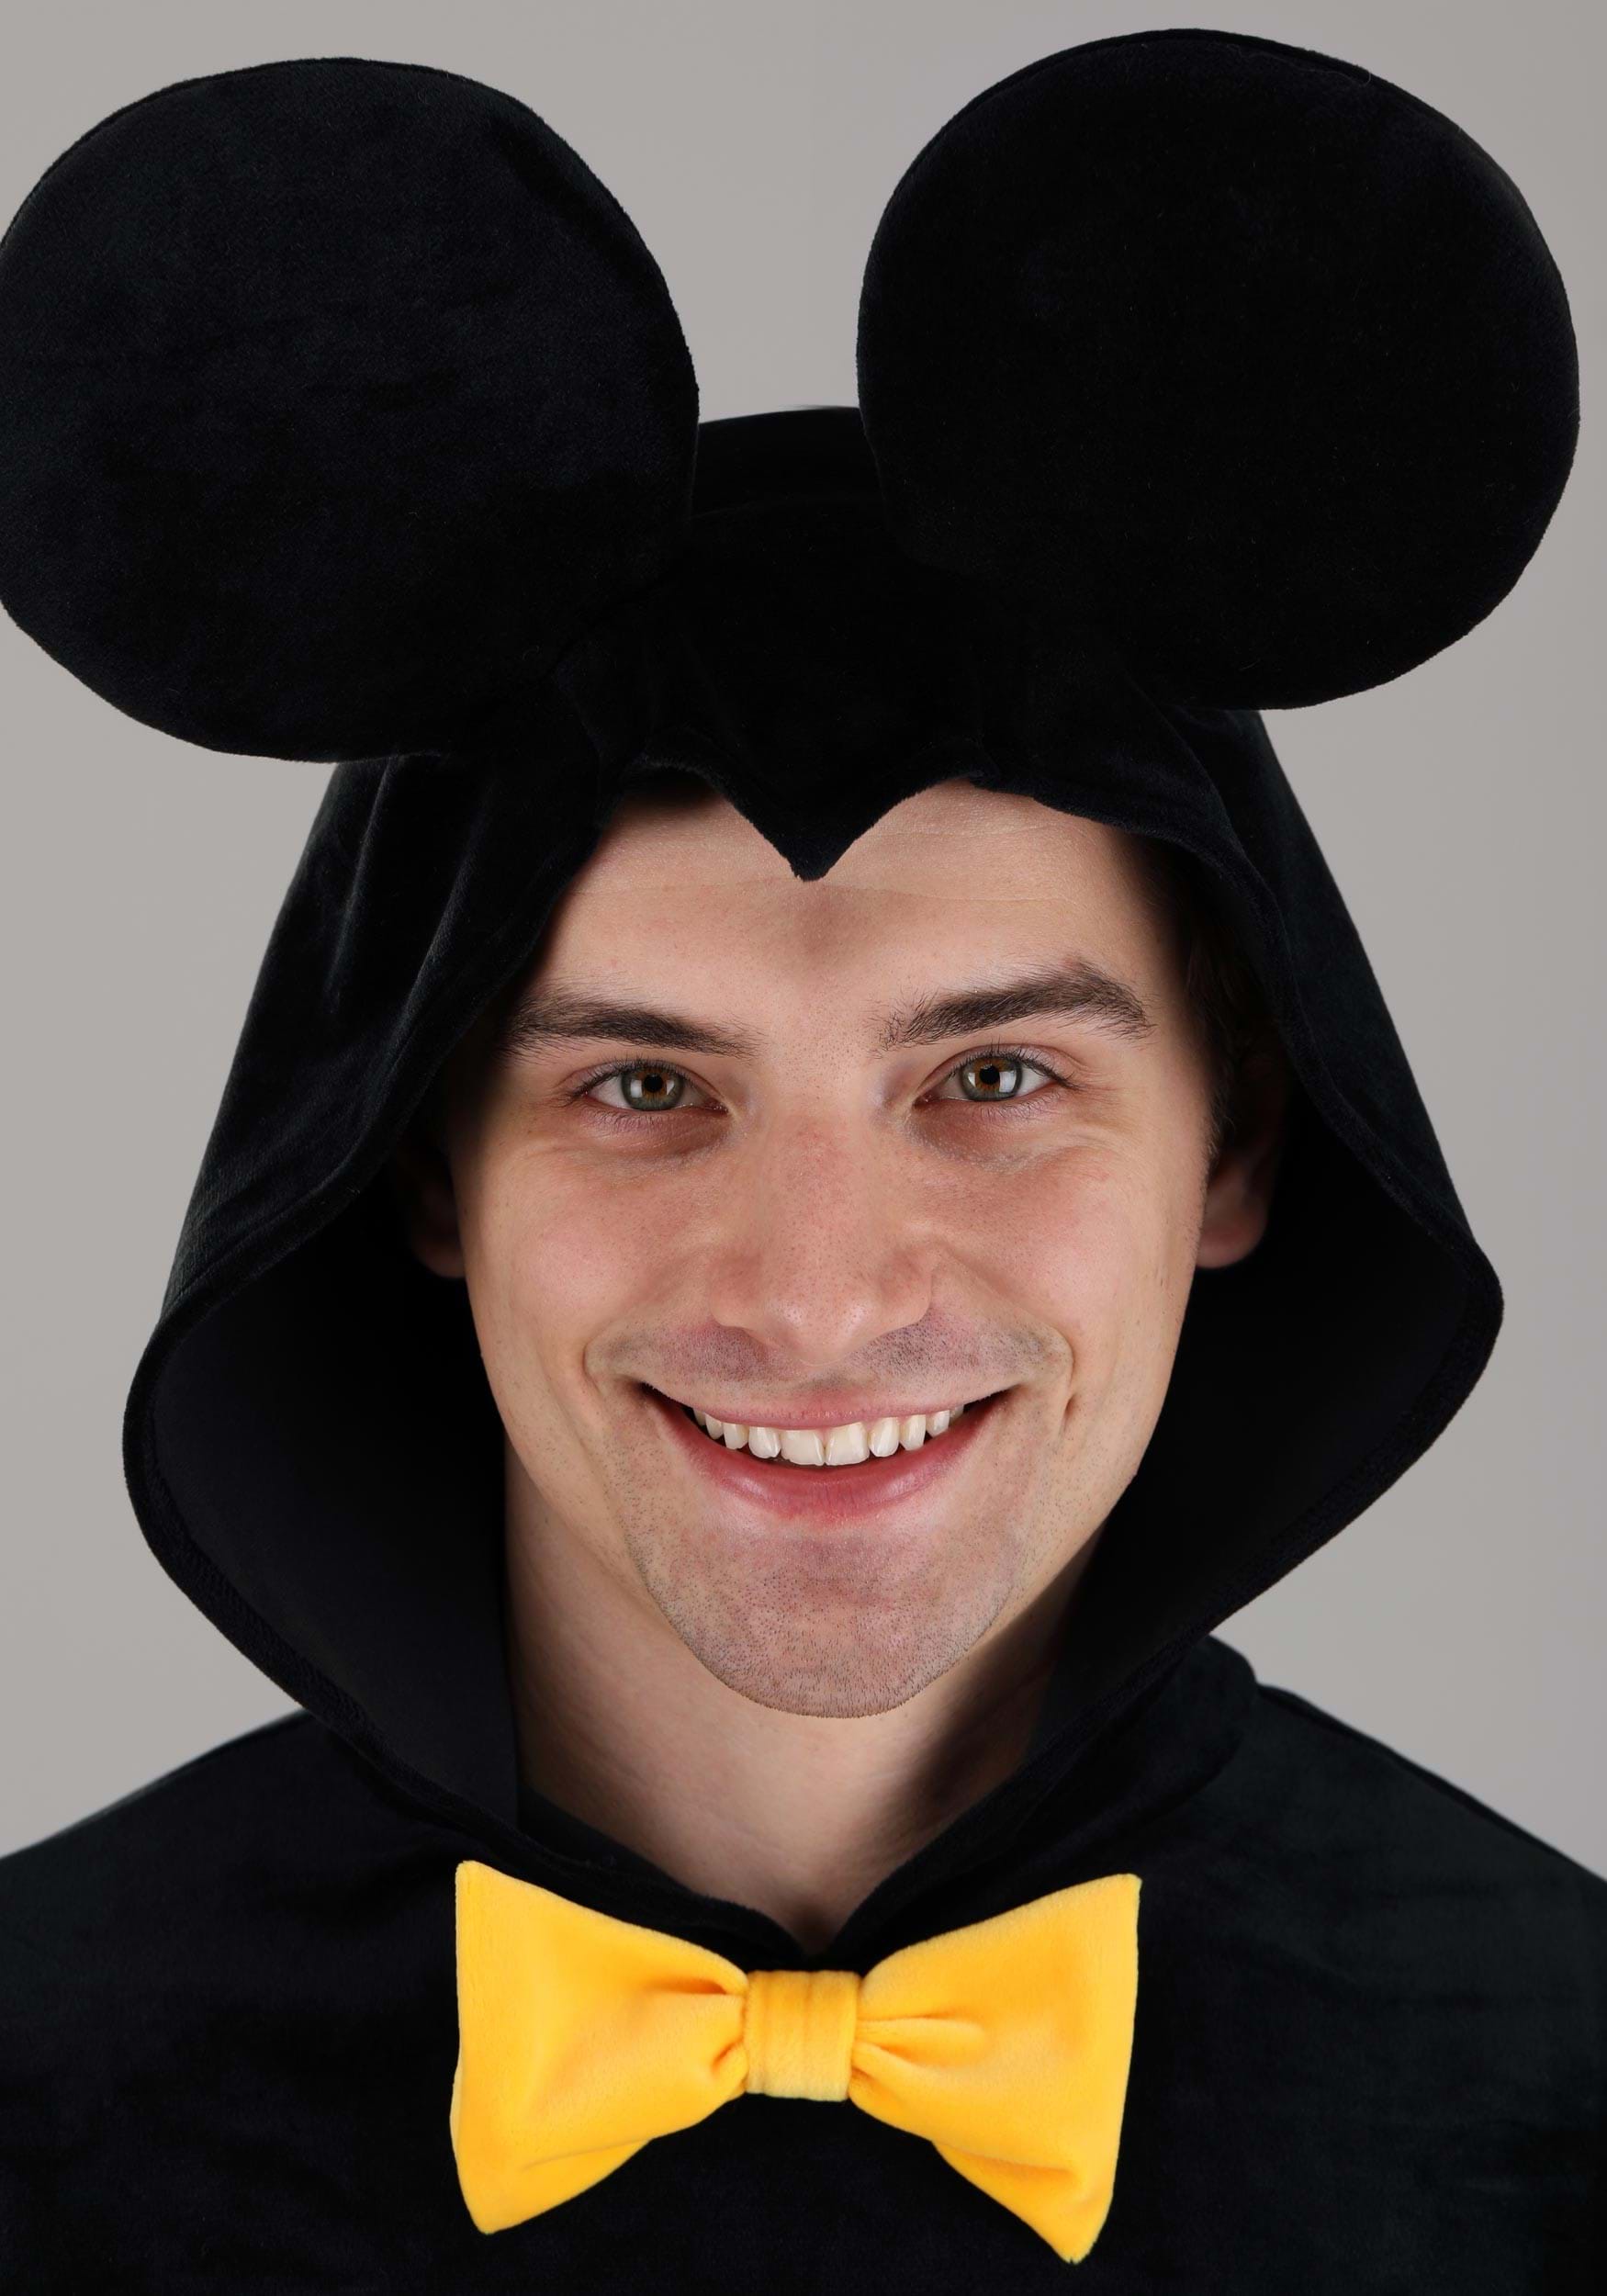 https://images.halloweencostumes.com/products/74862/2-1-281499/adult-deluxe-mickey-mouse-costume-alt-3.jpg